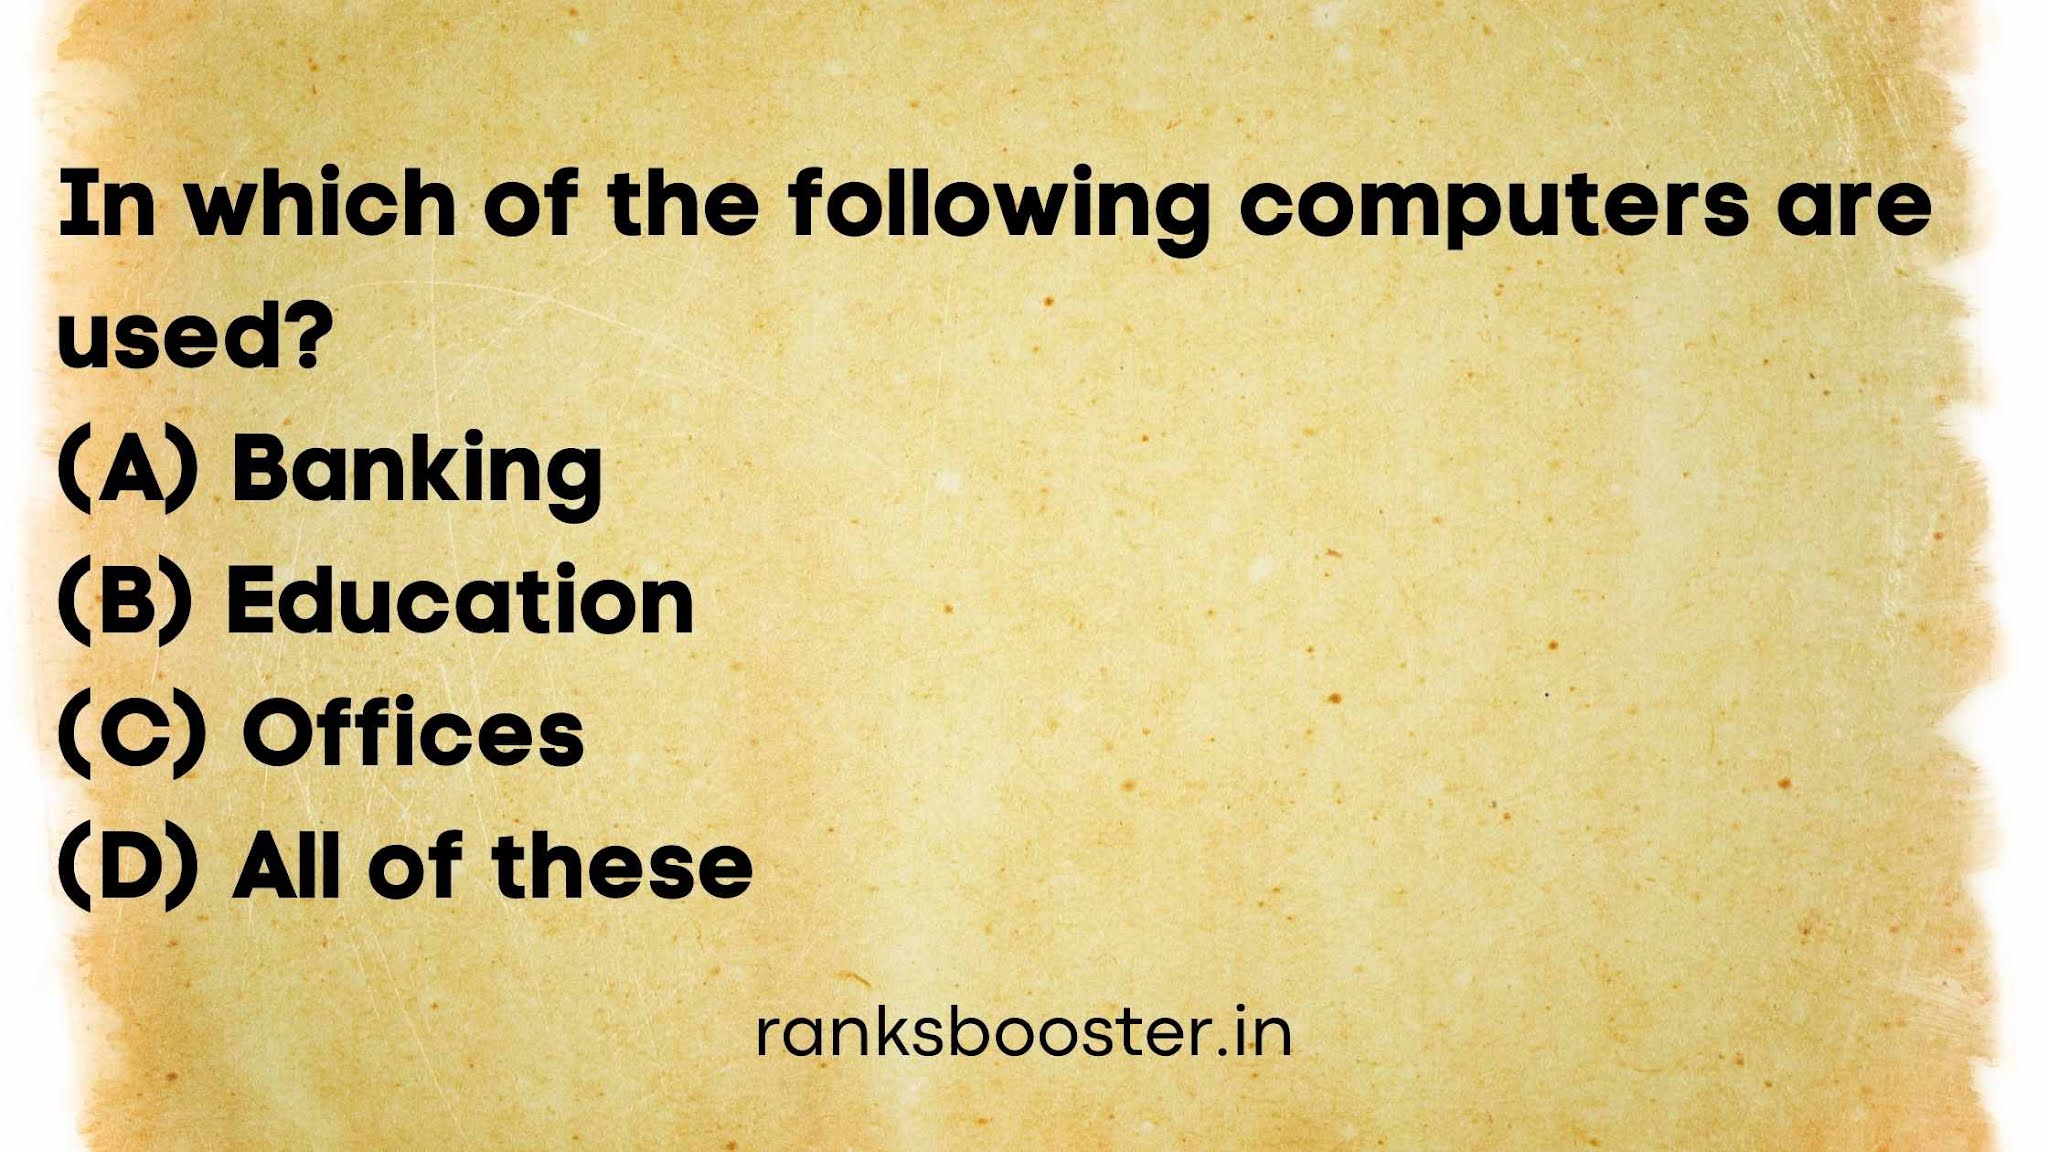 In which of the following computers are used?   (A) Banking   (B) Education   (C) Offices   (D) All of these